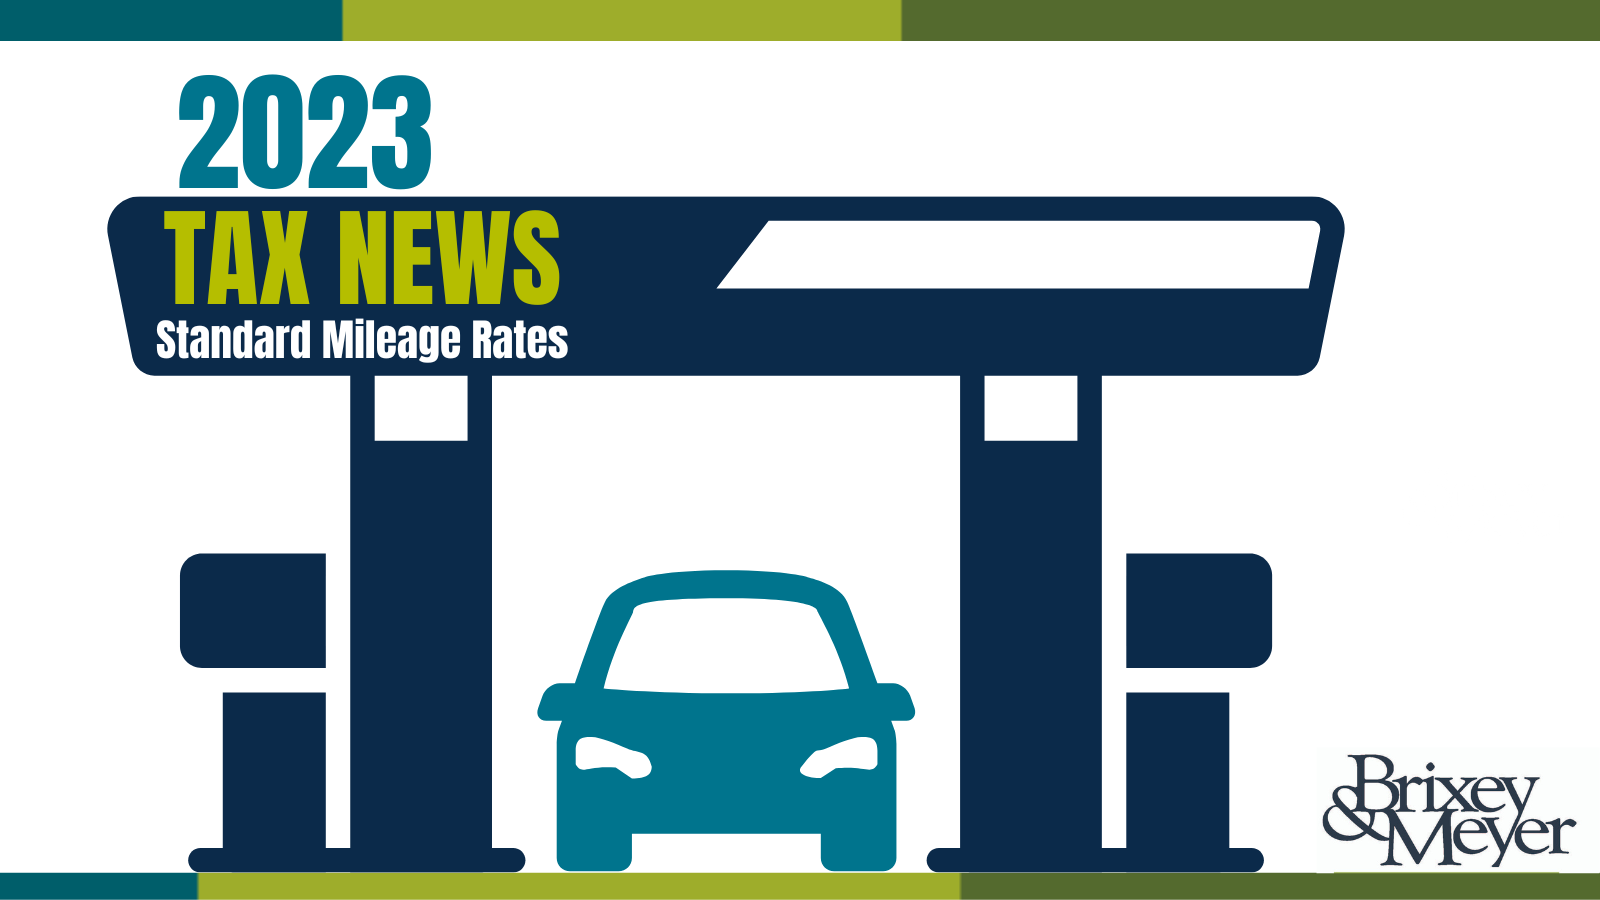 IRS Announces New Mileage Rate For 2023